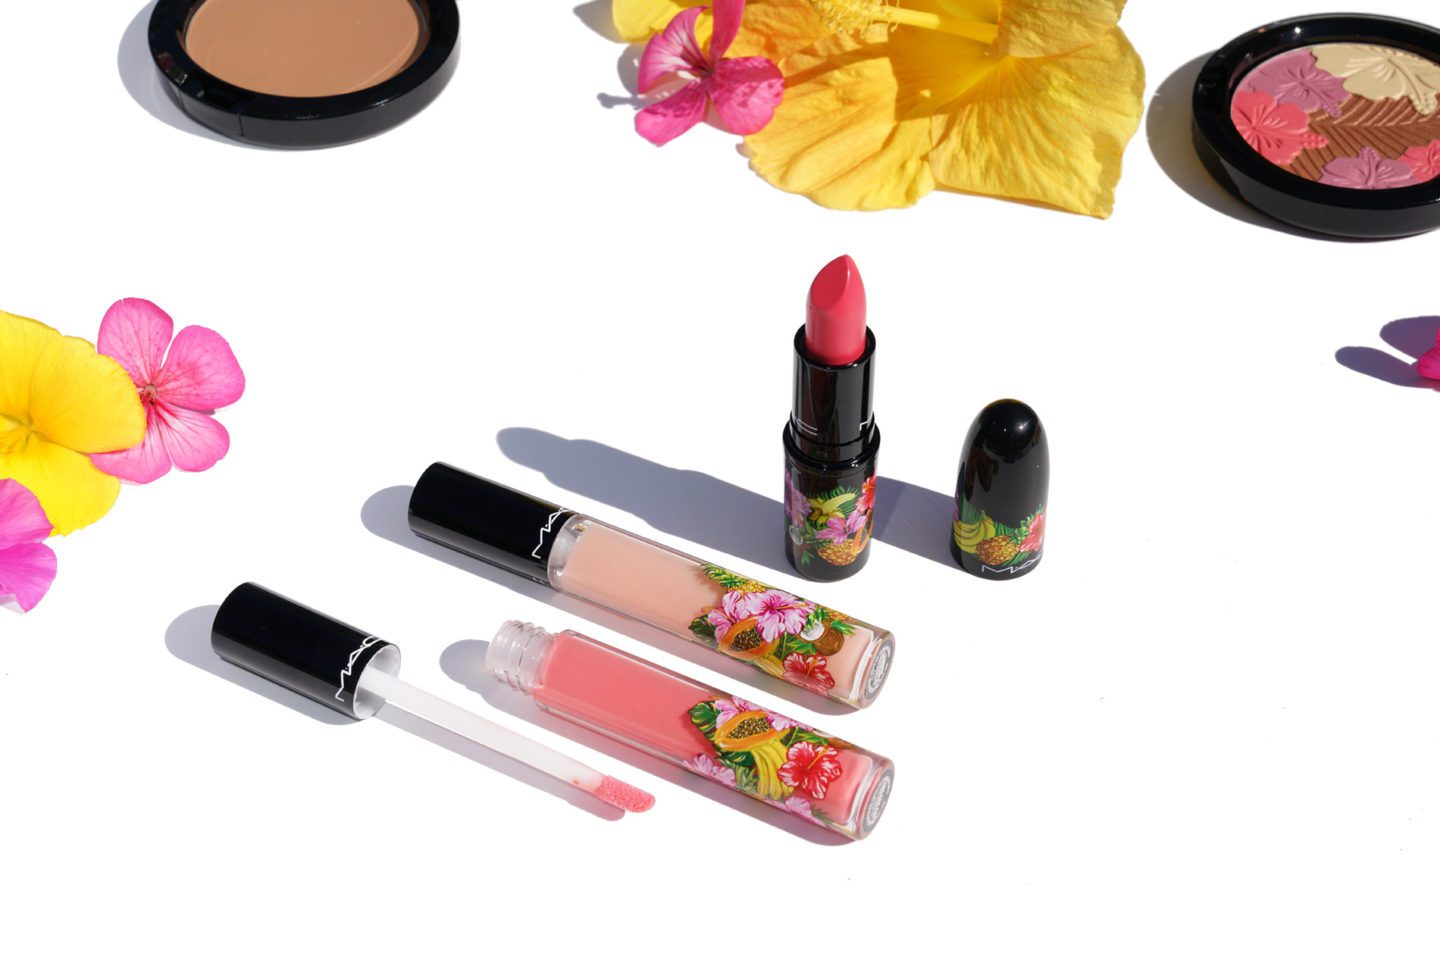 MAC Fruity Juicy Lip Cha-Cha-Cha, Summer Succulence and Love at First Bite | The Beauty Look Book